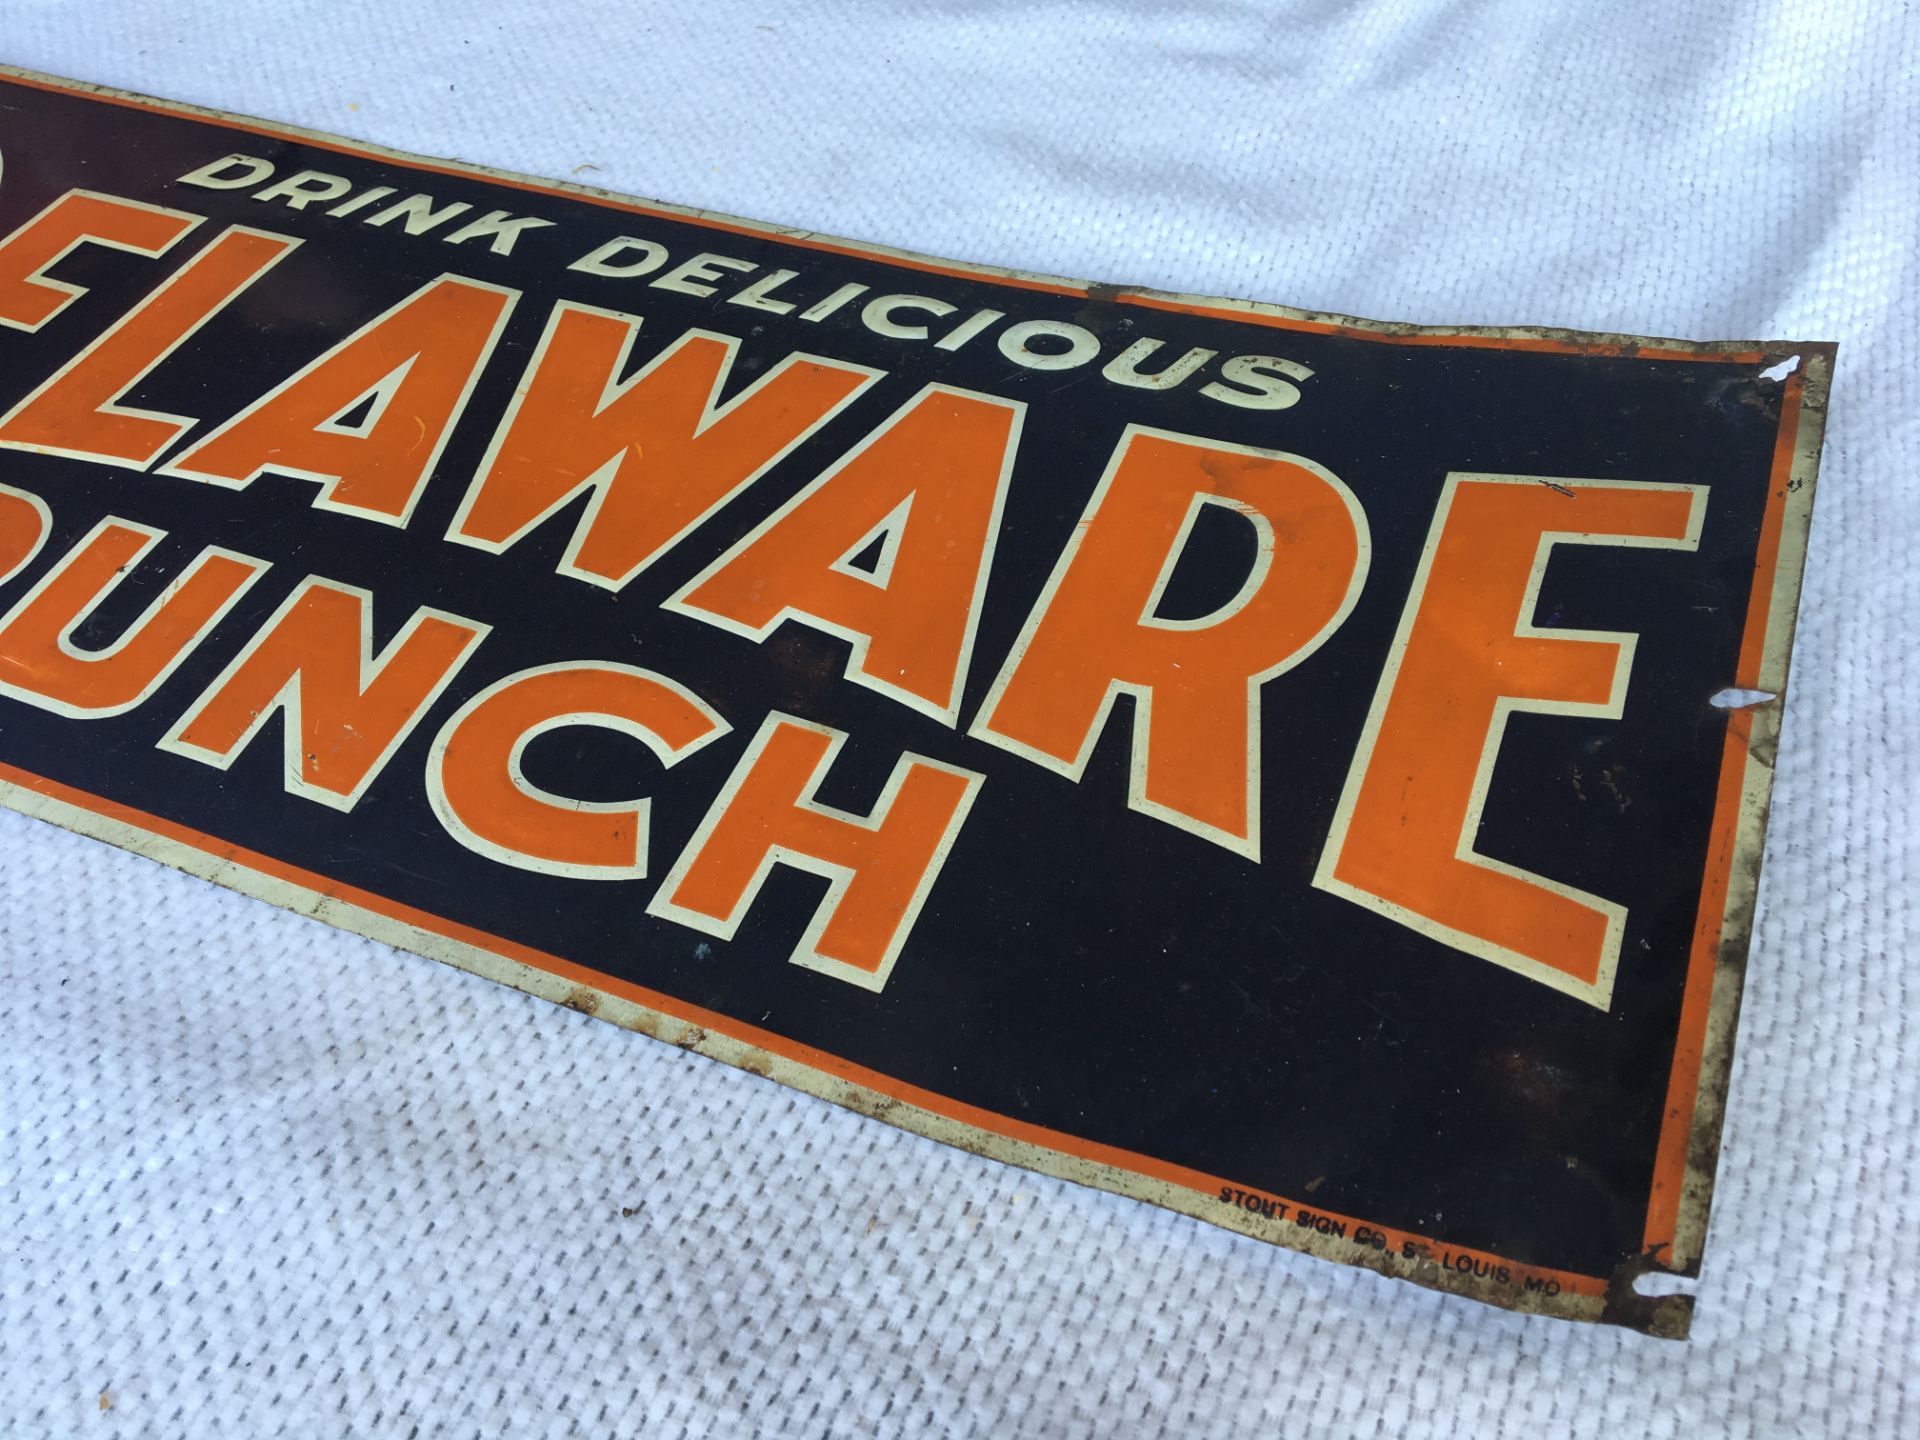 Delaware Punch, 35” x 11 ¼”, Metal Sign, Stout Sign Company - Image 2 of 2